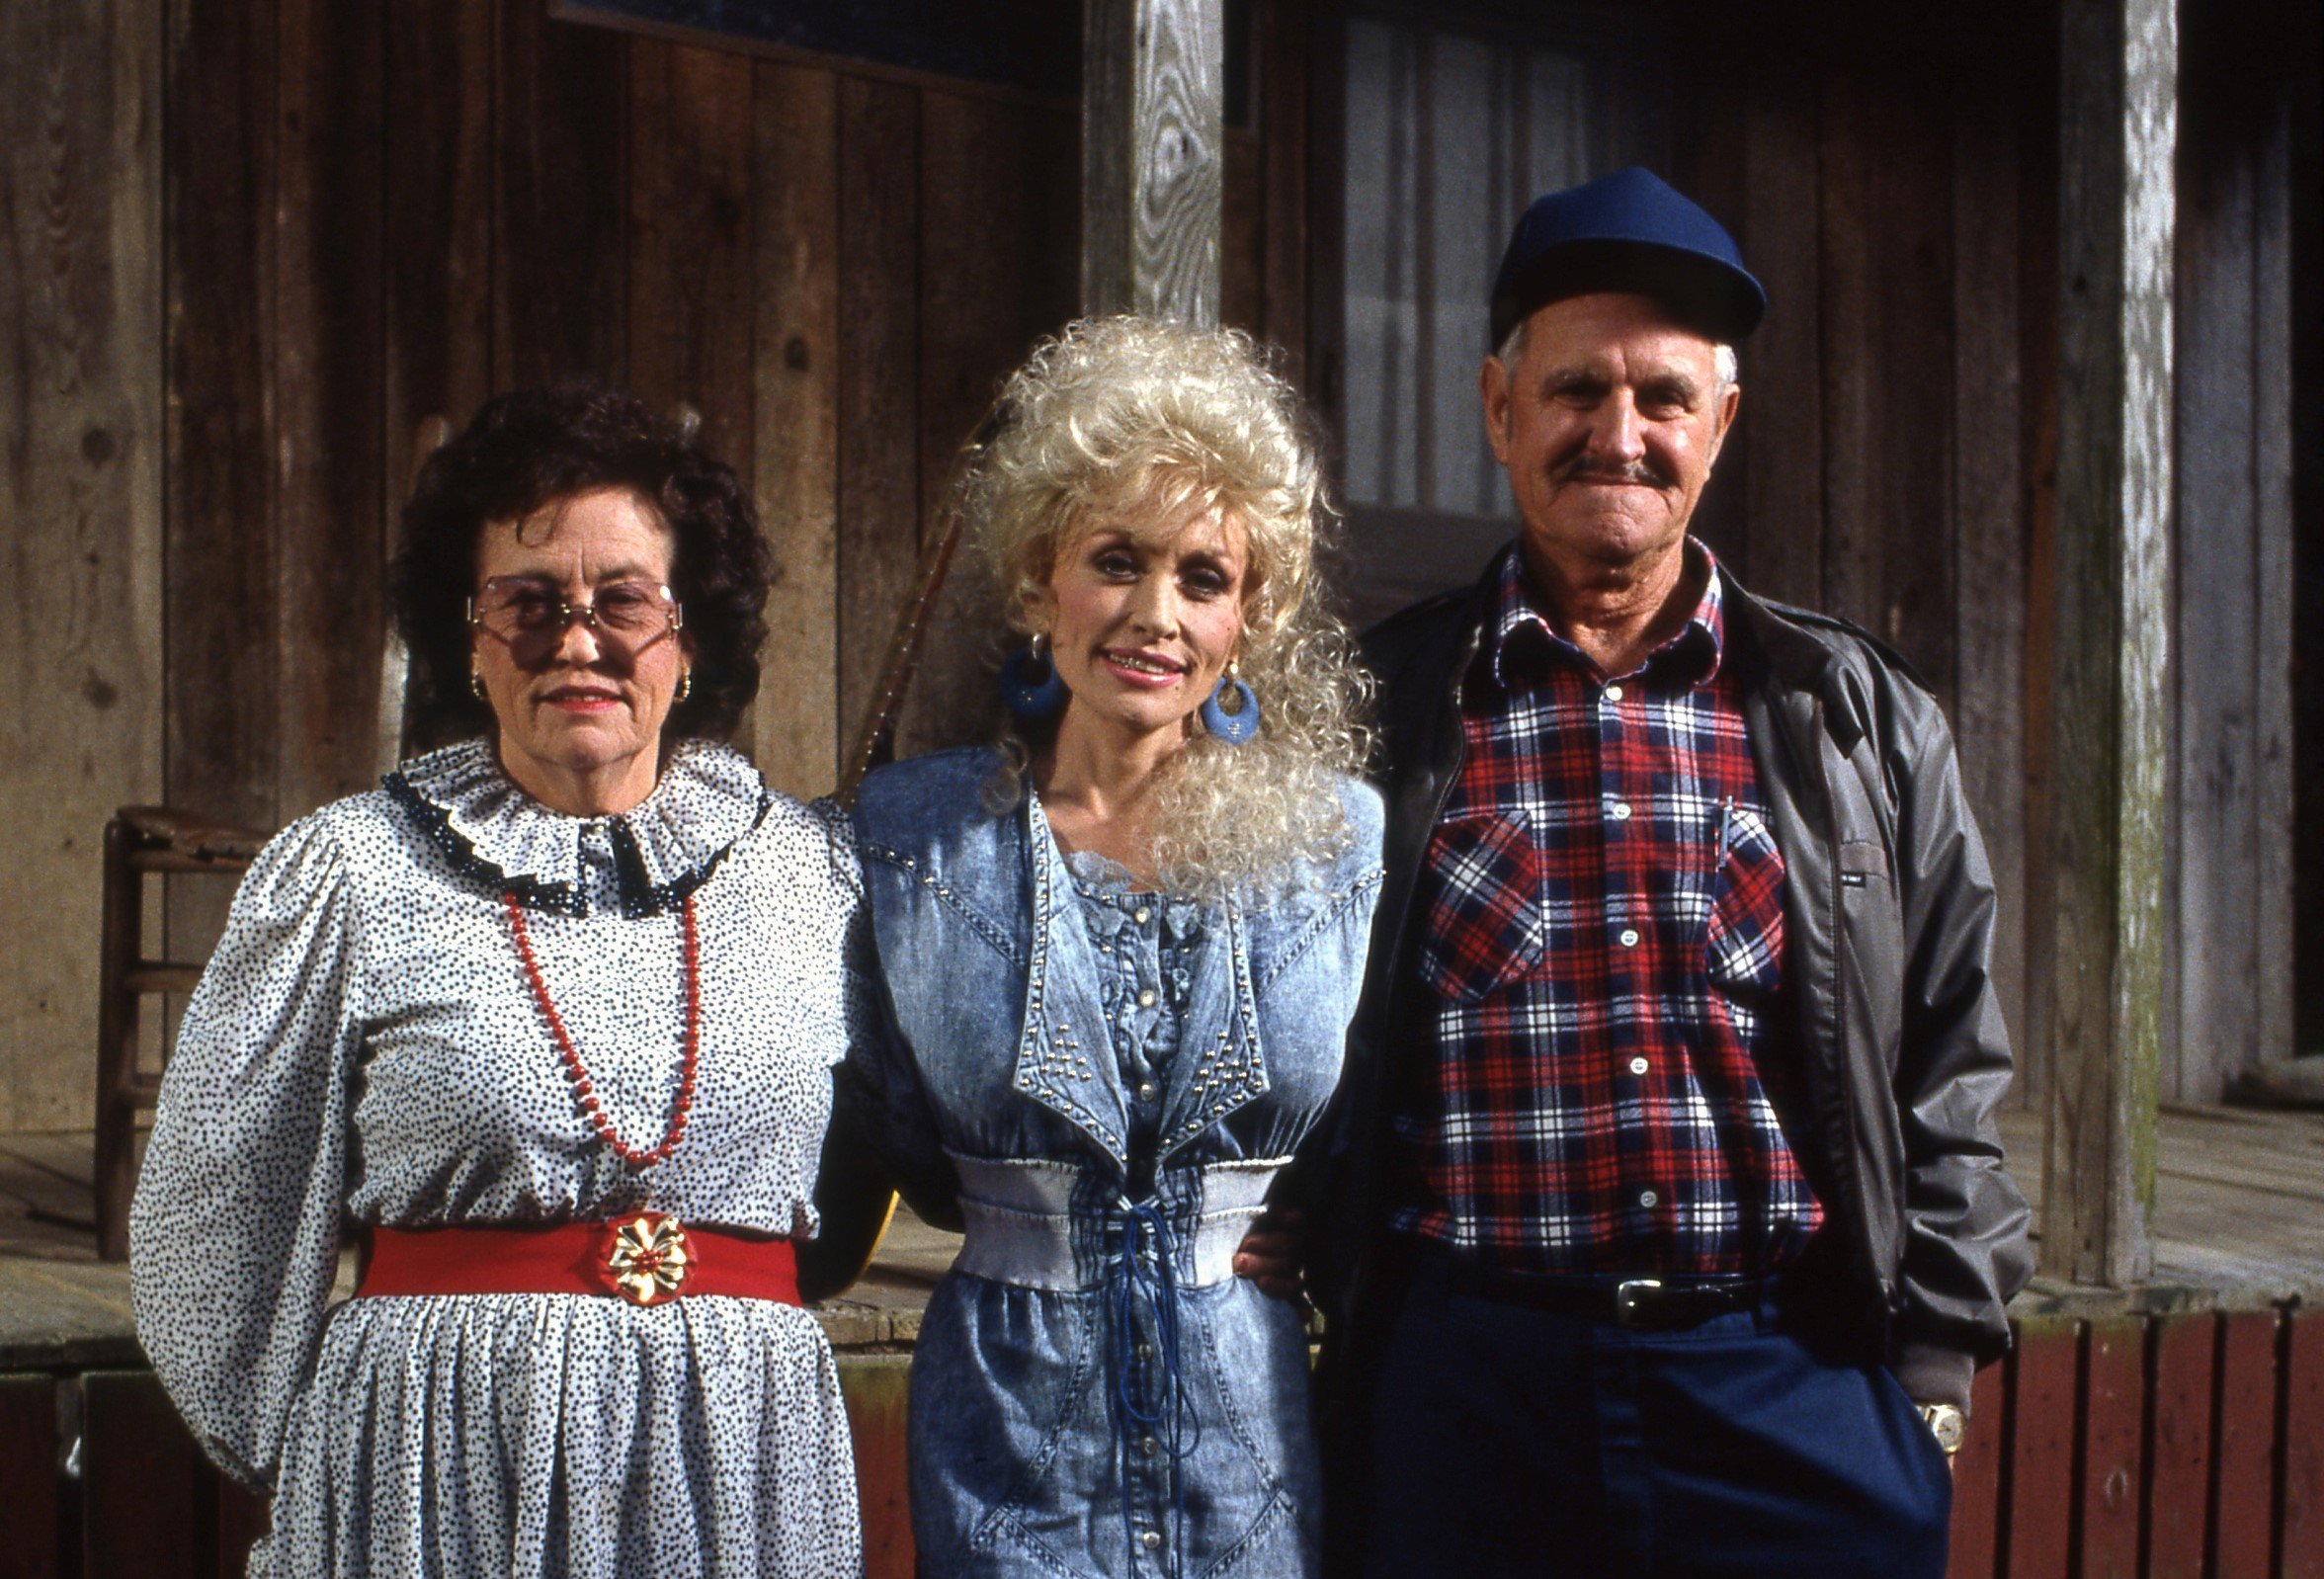 Dolly Parton's mother wears a black and white dress with a red belt. Dolly Parton wears a denim dress. Dolly Parton's father wears a red plaid shirt and blue hat. They stand in front of a house.